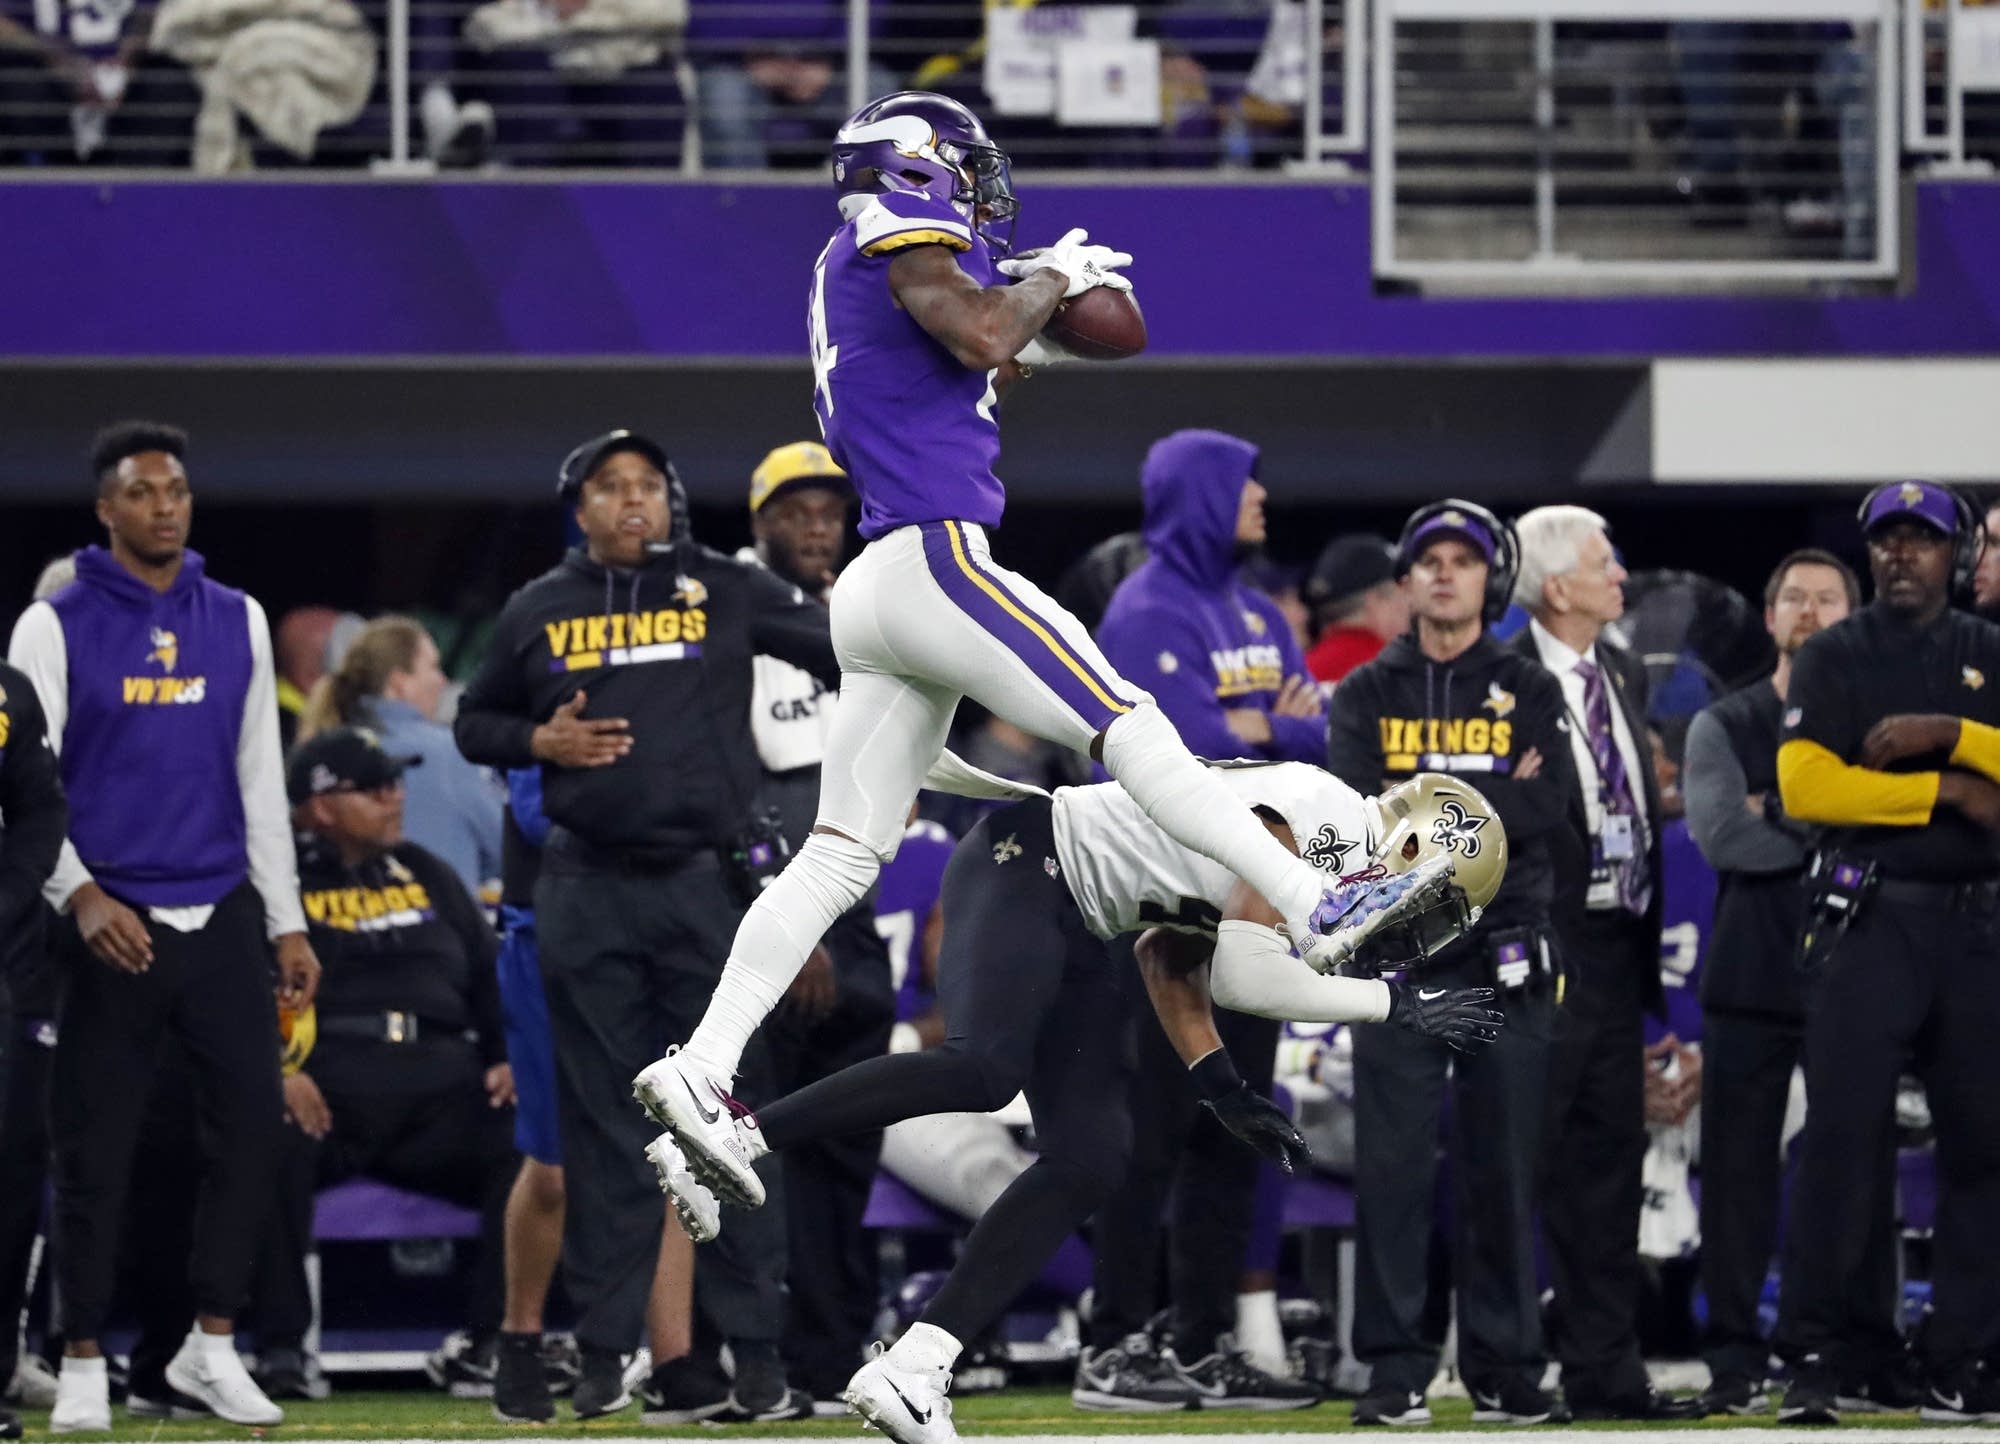 Skol-Blooded: The Aftermath, and Images From the Minneapolis Miracle